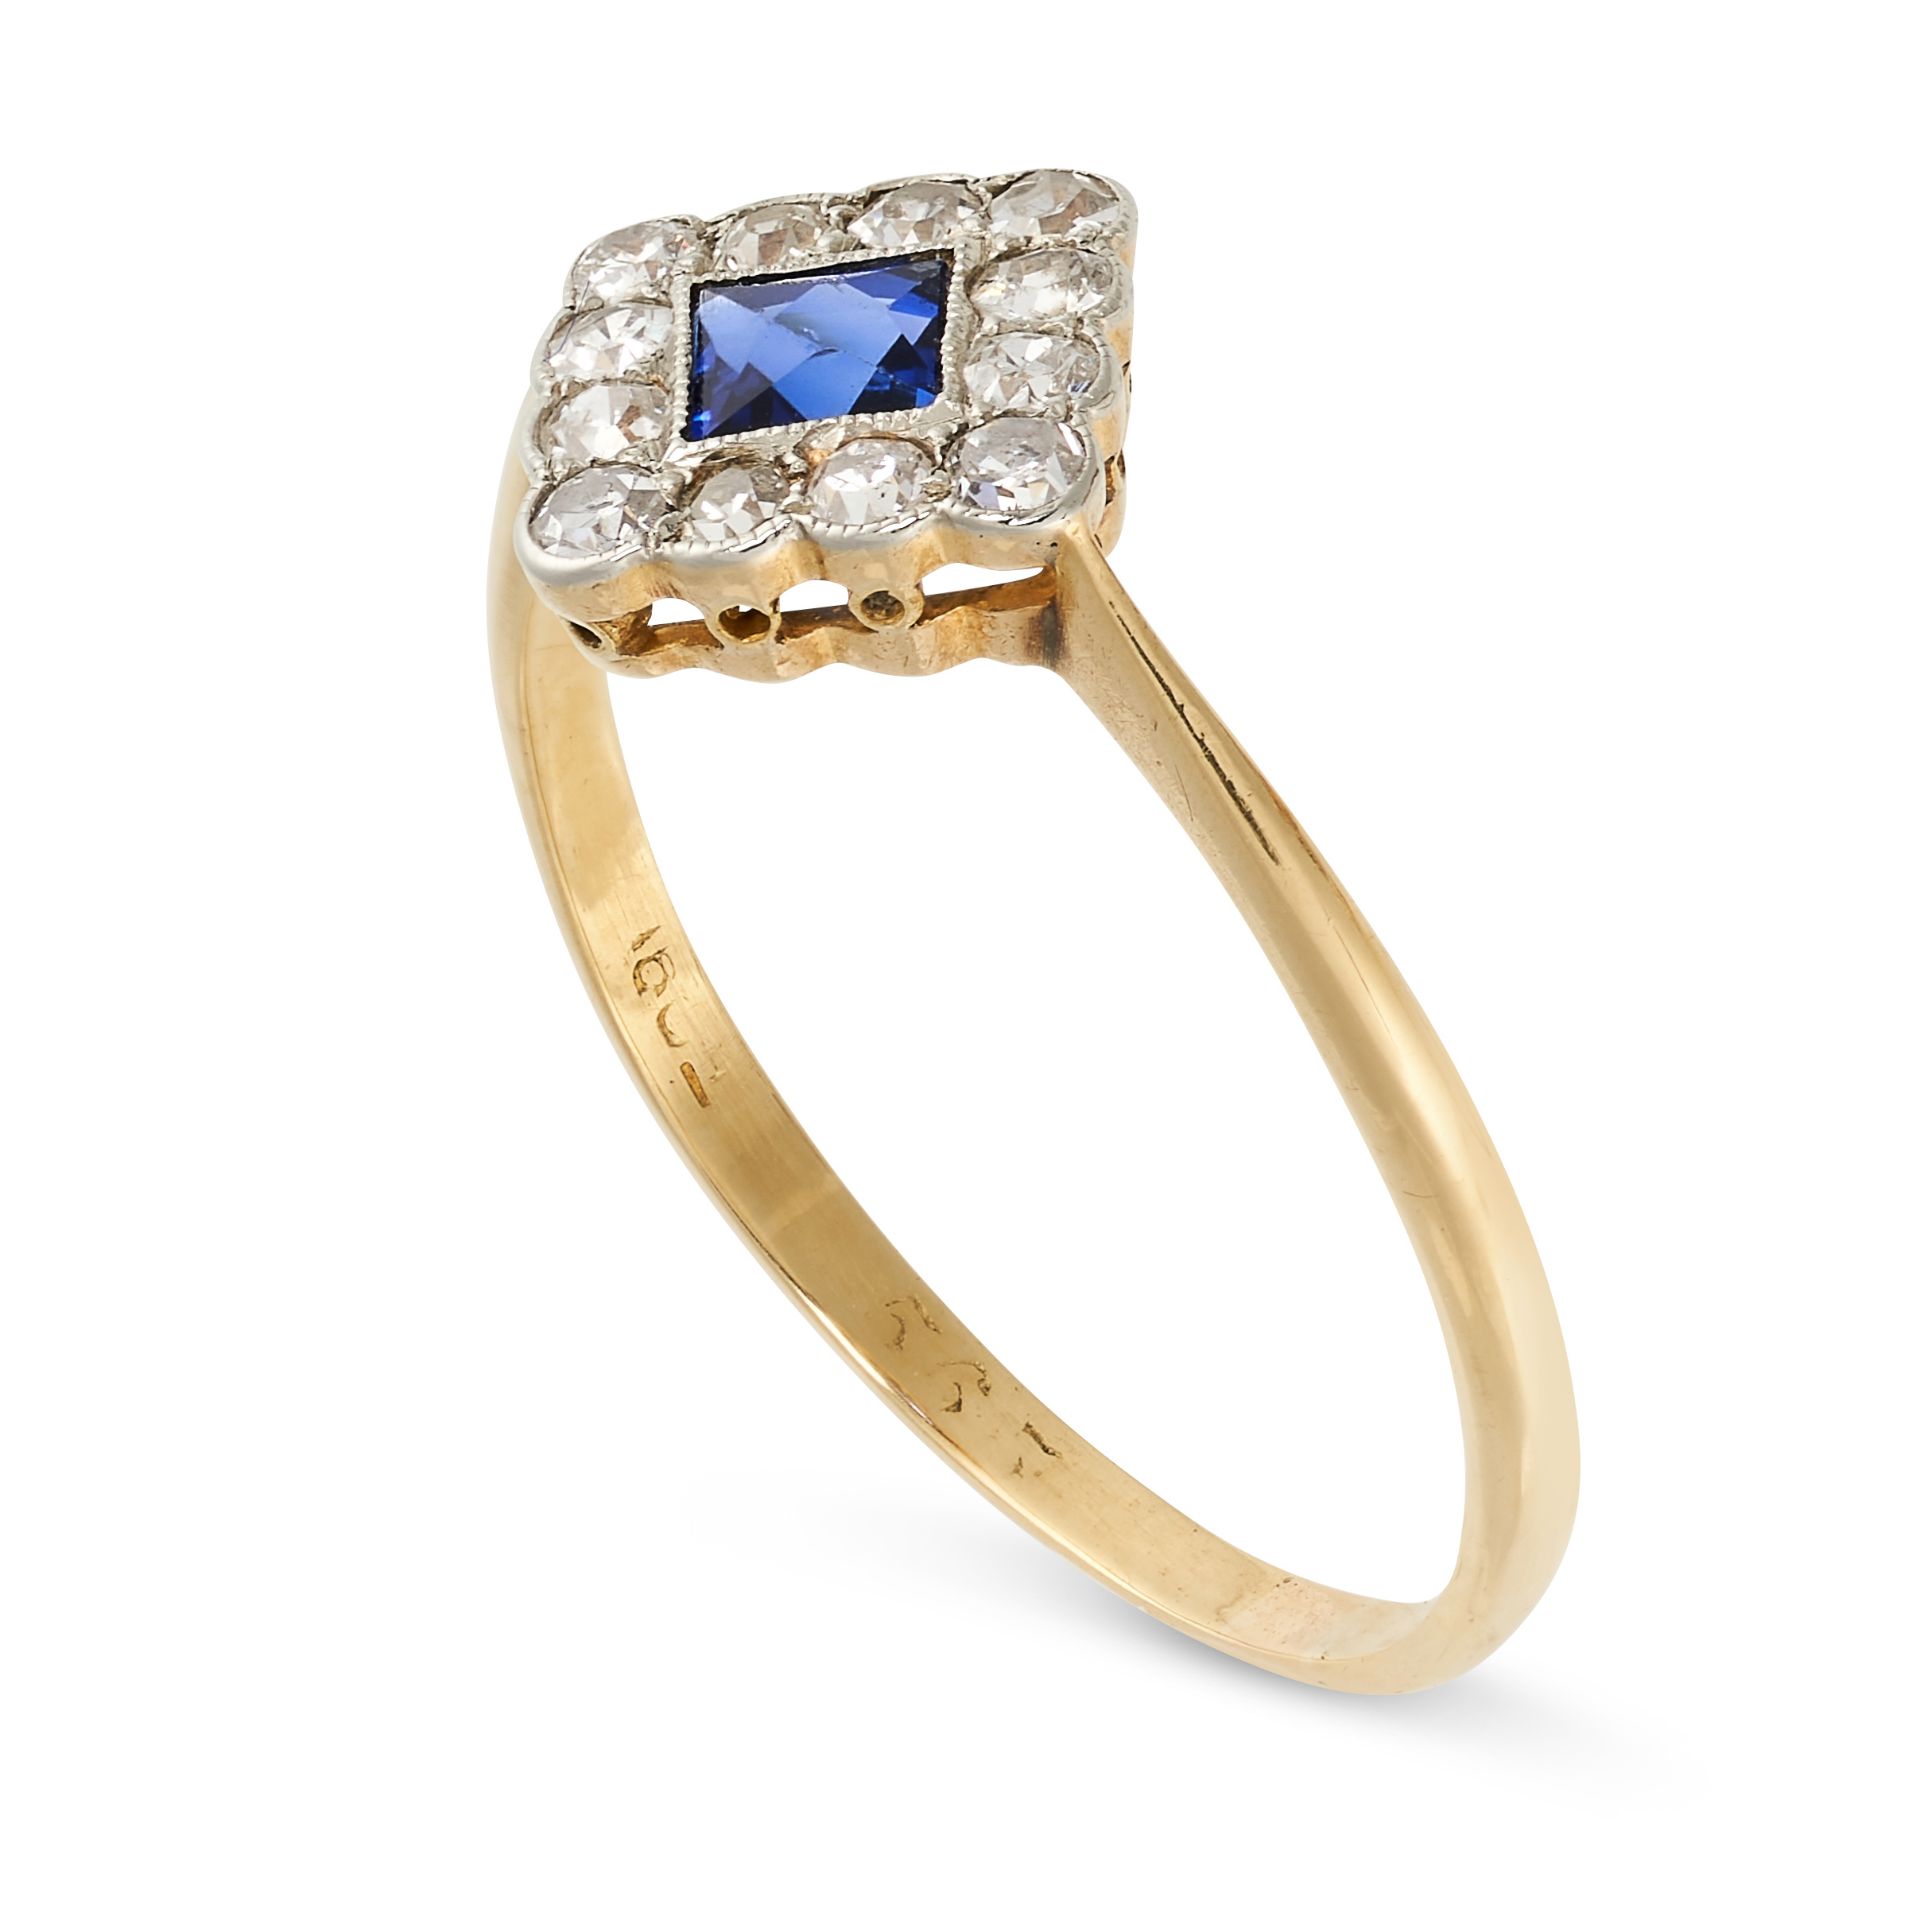 NO RESERVE - AN ART DECO SAPPHIRE AND DIAMOND RING in 18ct yellow gold and platinum, the face set - Image 2 of 2